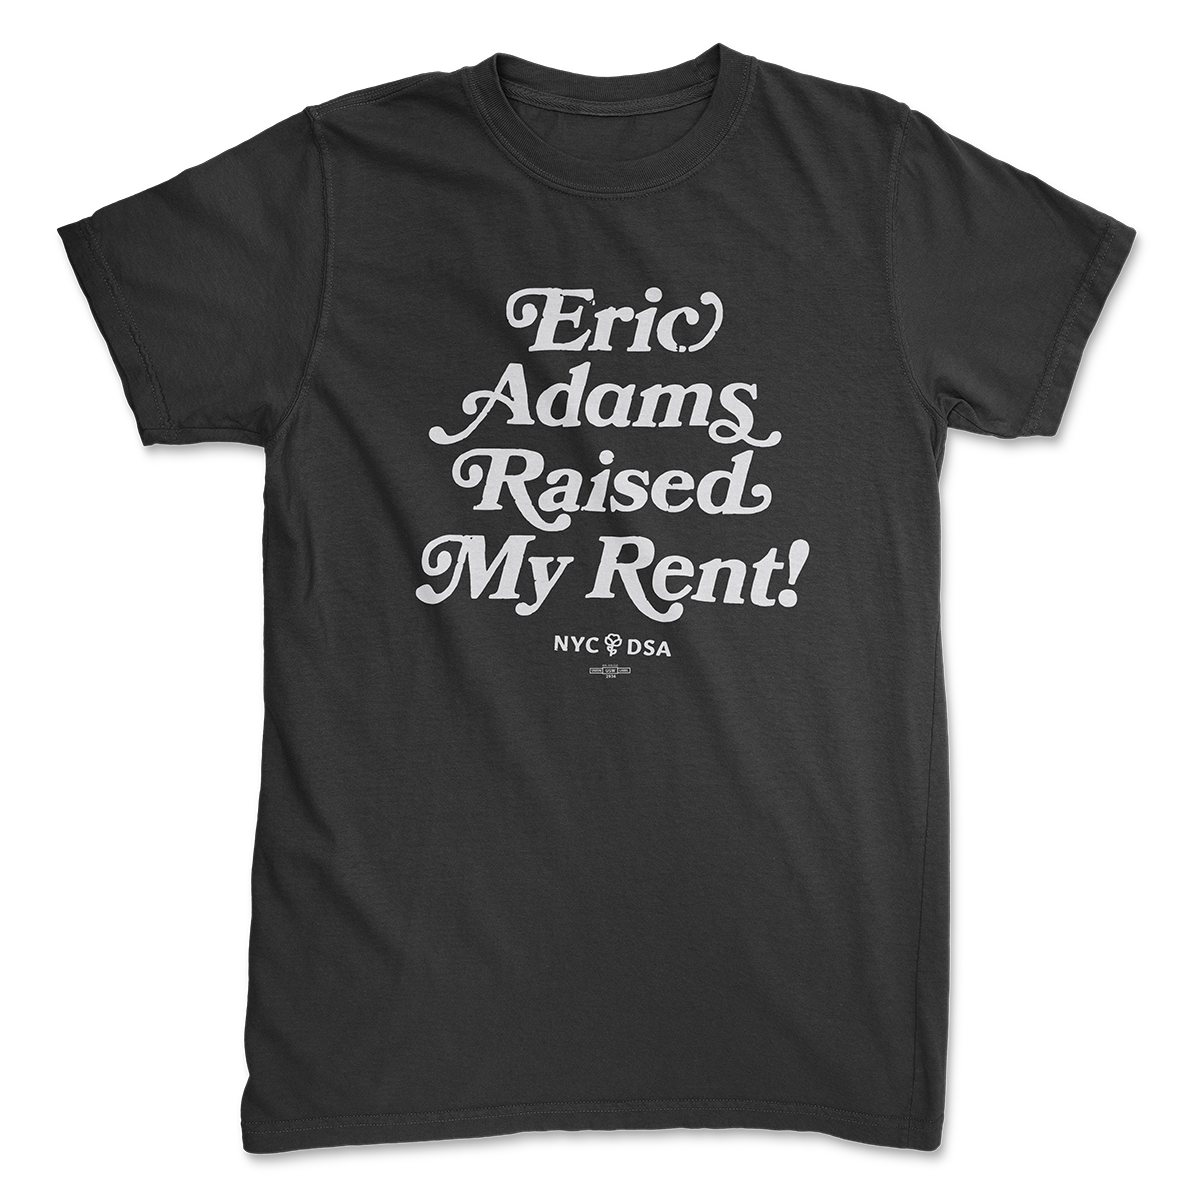 "Eric Adams Raised My Rent!" black t-shirt with white lettering